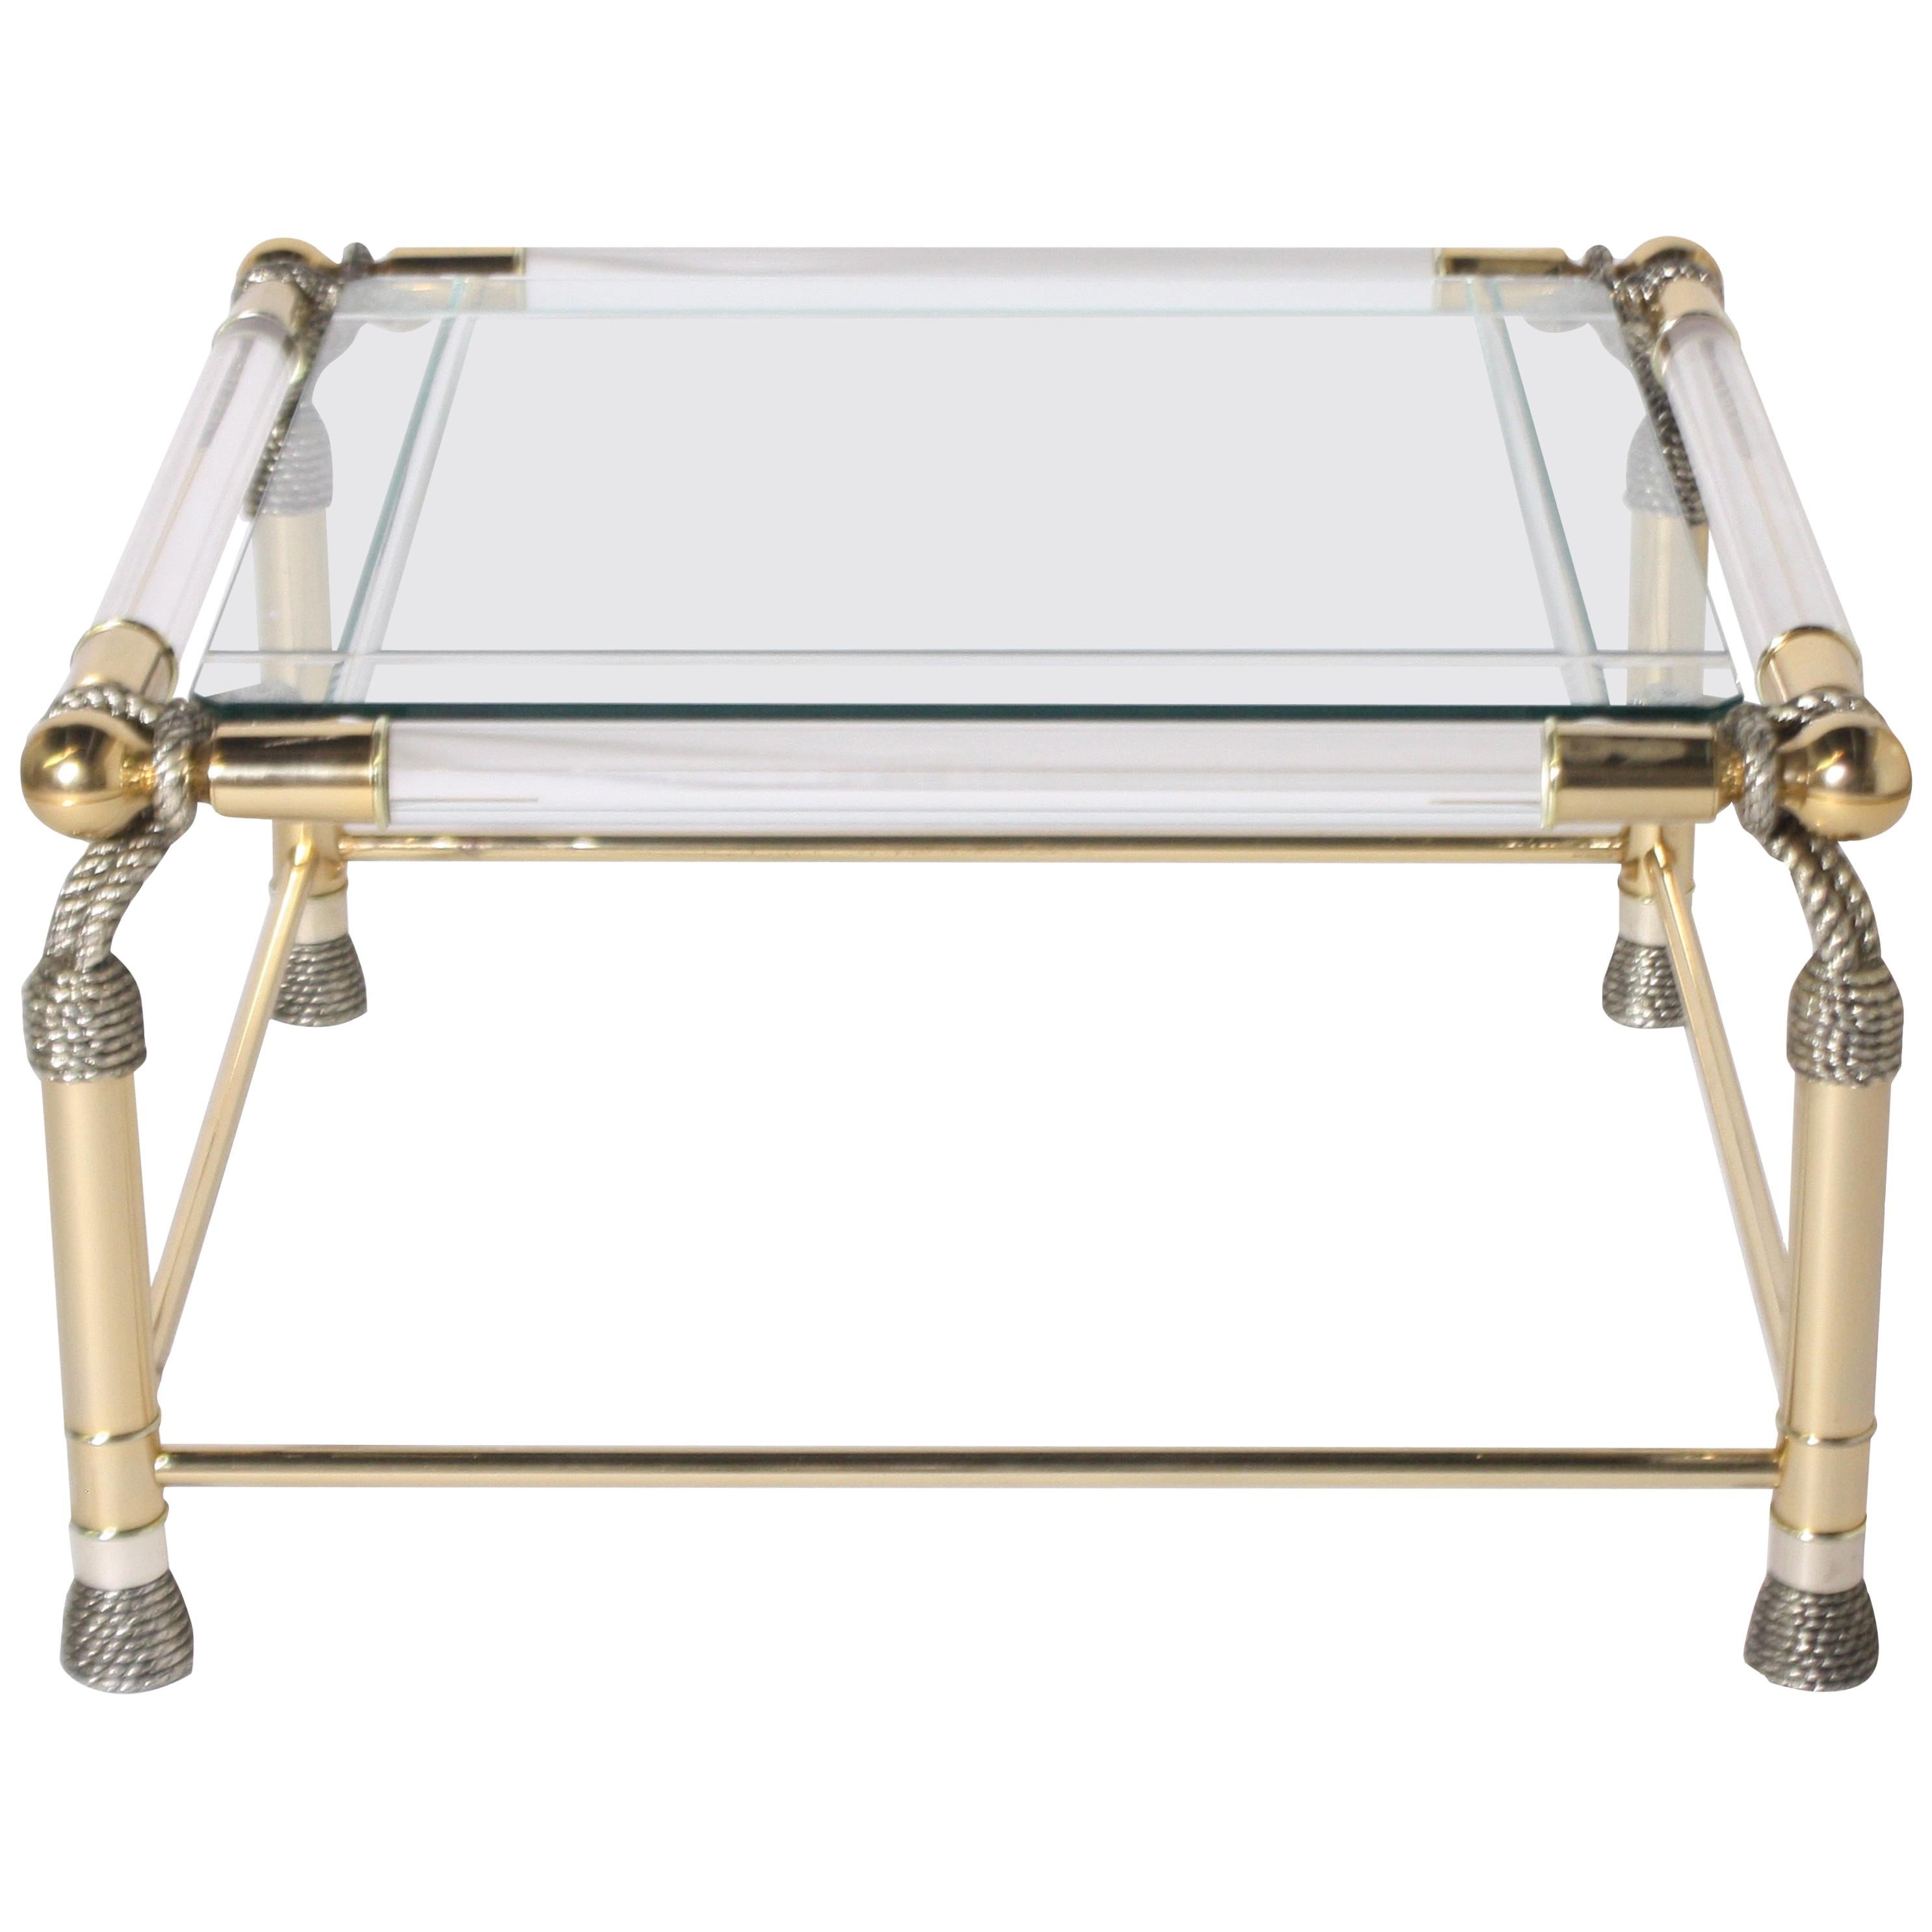 Brass and Lucite Rope Motif Table, circa 1950